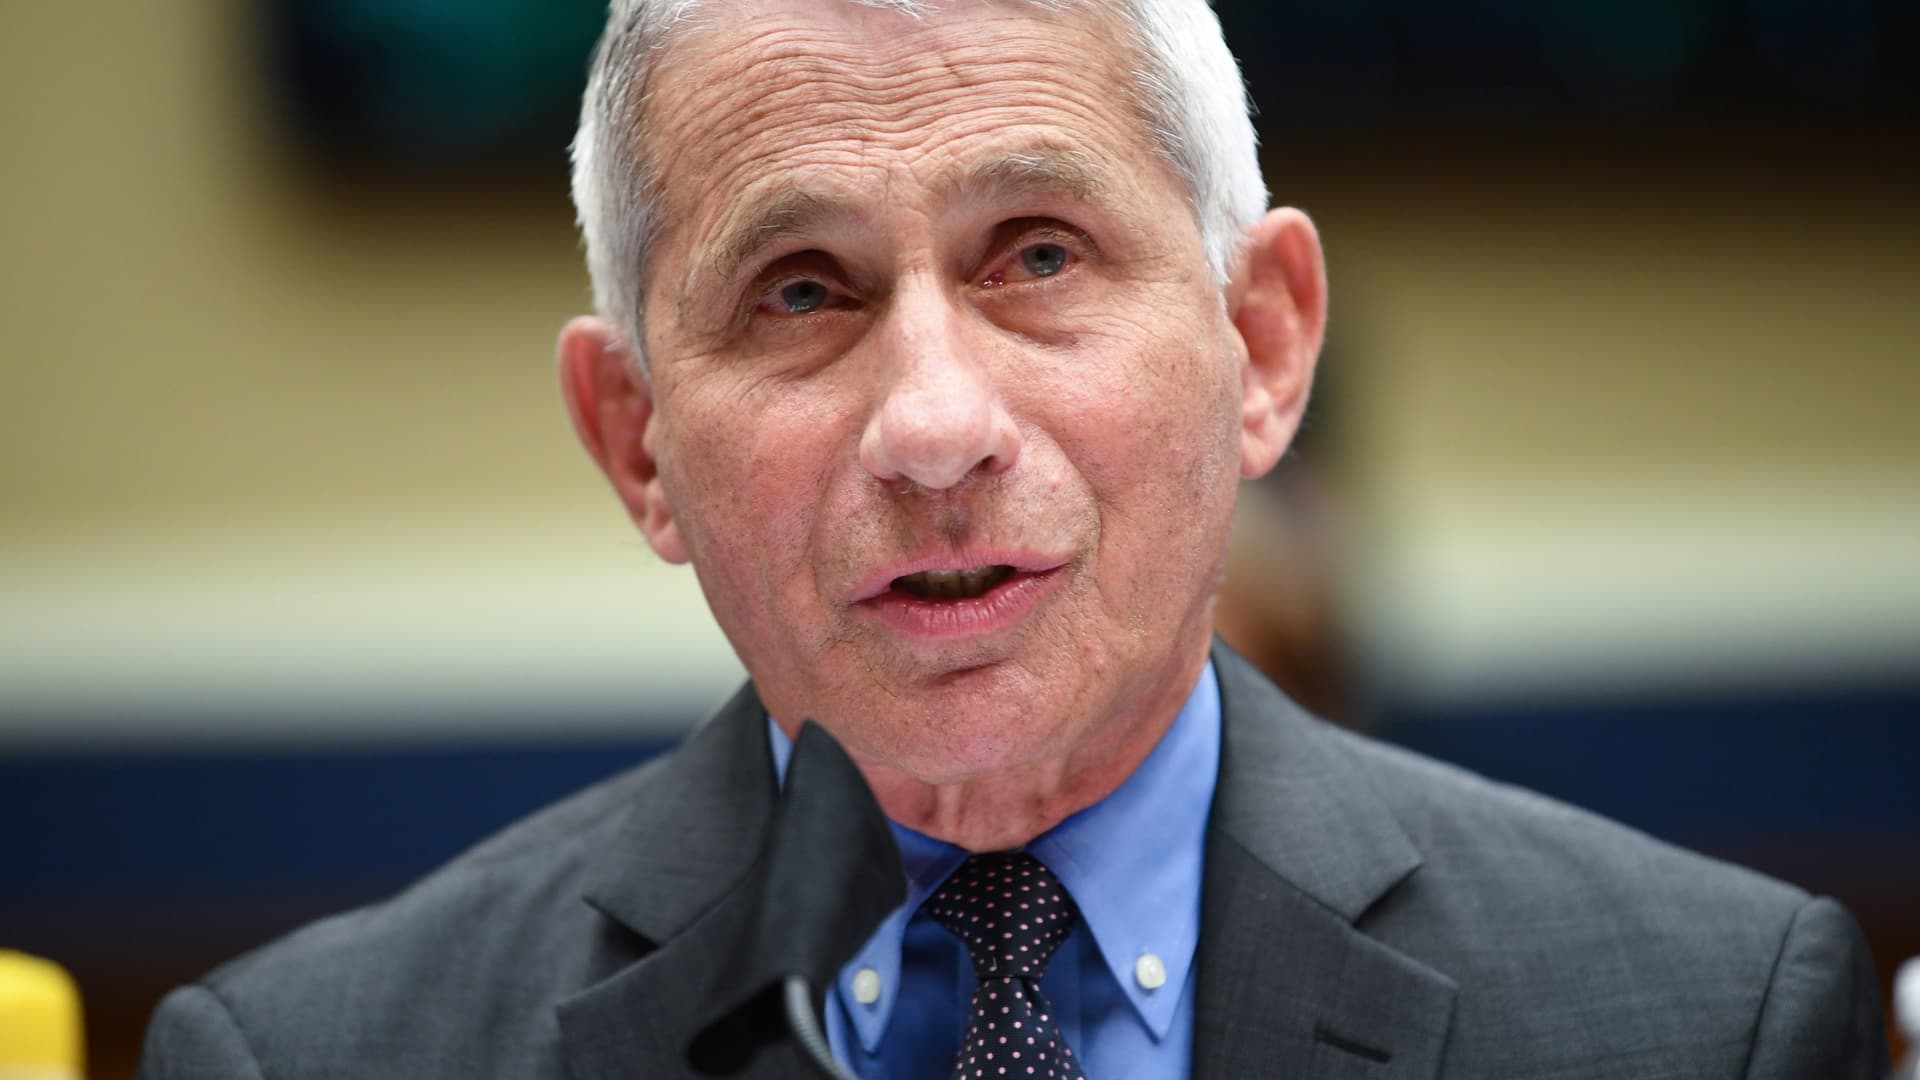 Director of the National Institute for Allergy and Infectious Diseases Dr. Anthony Fauci testifies before the House Committee on Energy and Commerce on the Trump Administration's Response to the COVID-19 Pandemic, on Capitol Hill in Washington, DC, June 23, 2020.